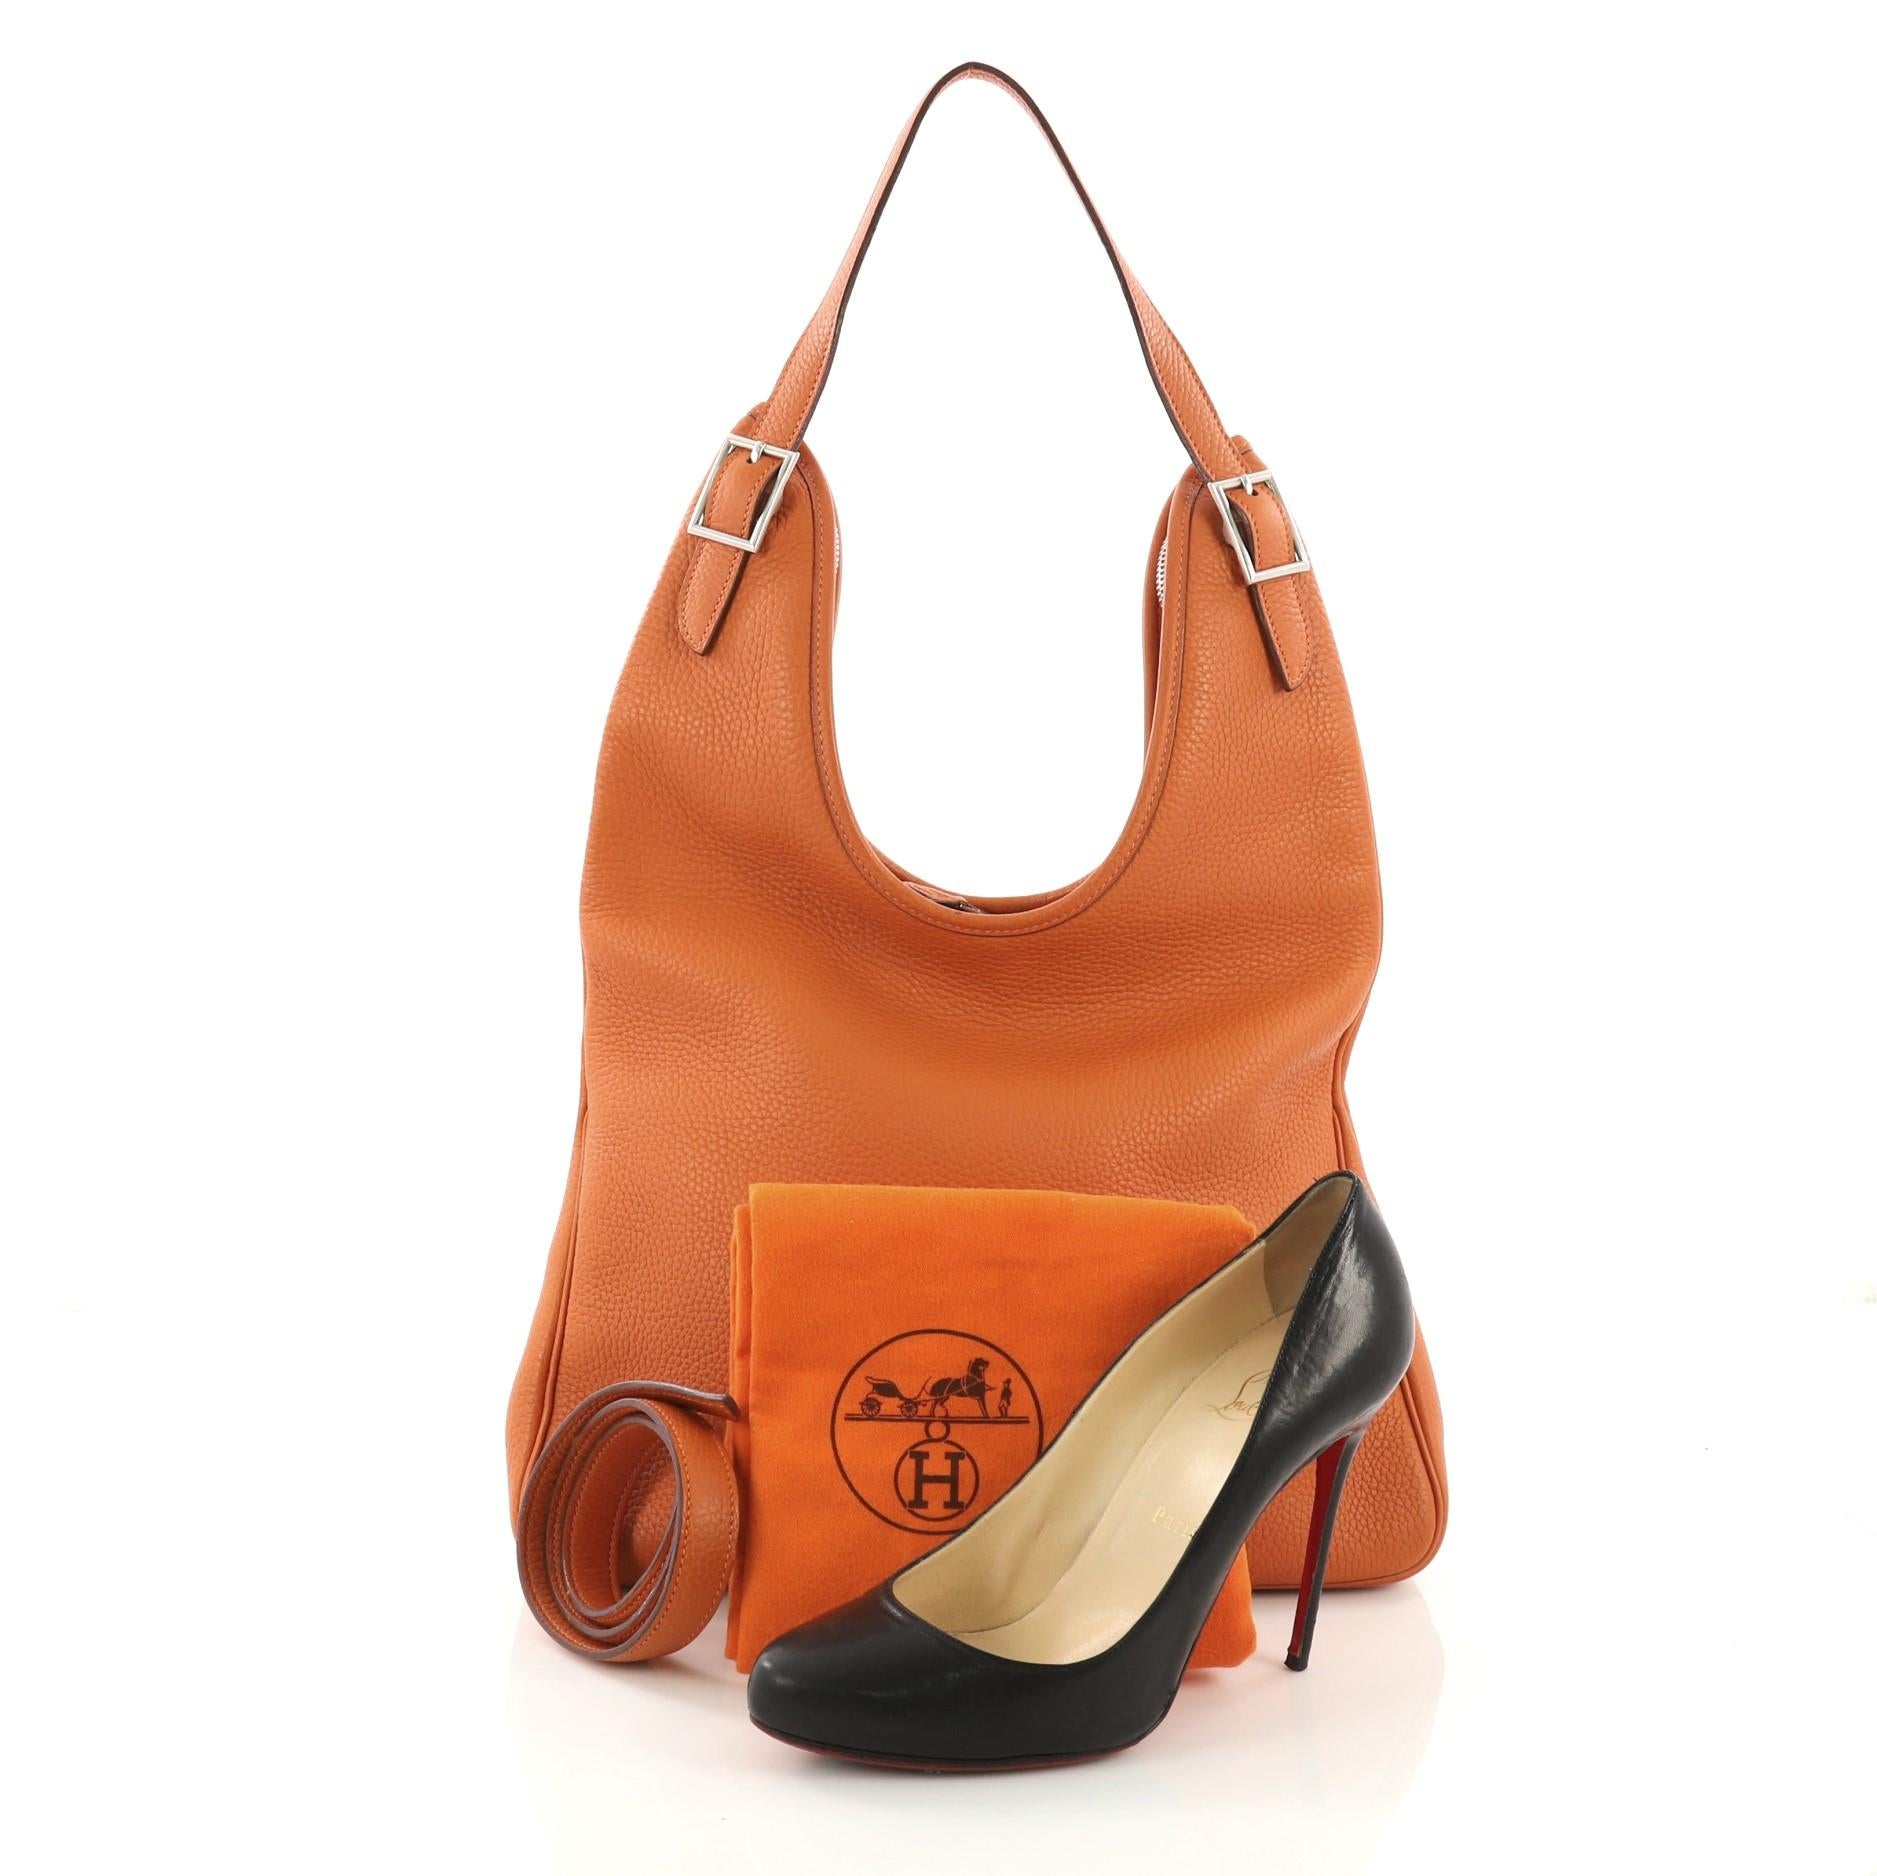 This Hermes Massai Handbag Leather 32, crafted in Potiron orange clemence leather, features a single looped shoulder strap and palladium-tone hardware. Its top zip closure opens to a beige fabric interior with zip pocket. Date code reads: H Square